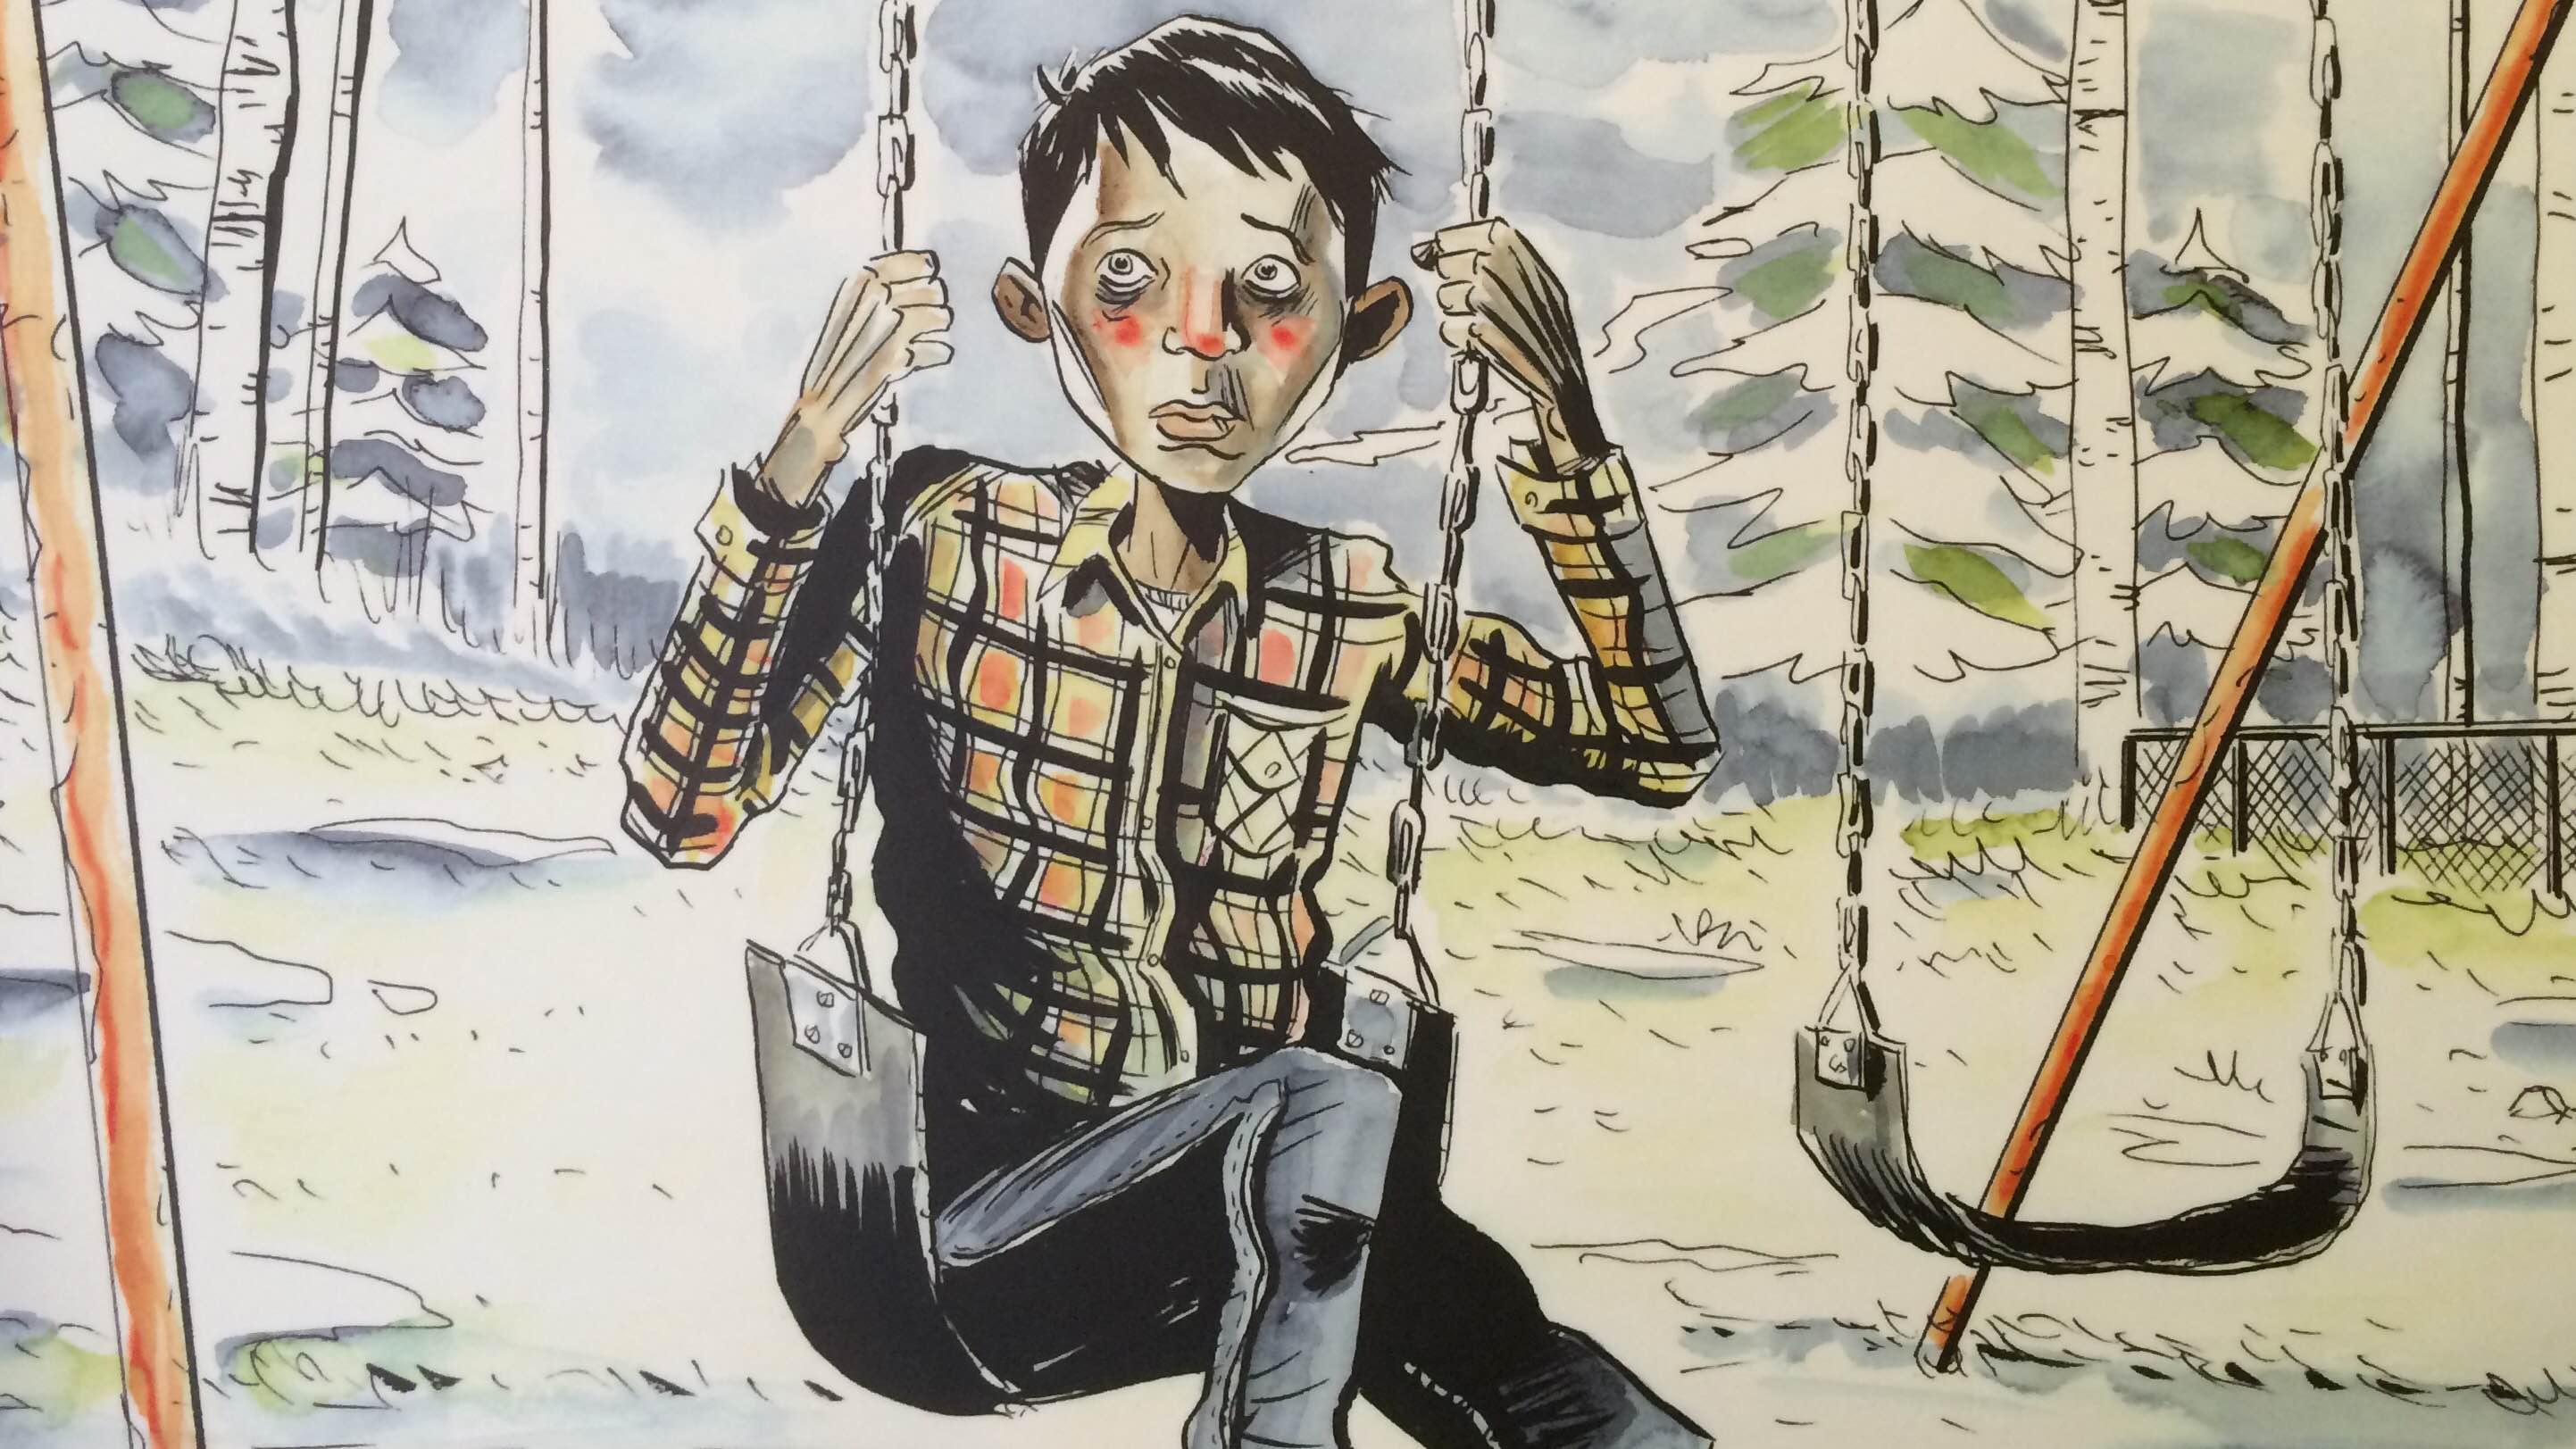 Illustration from the Secret Path project by artist Jeff Lemire.